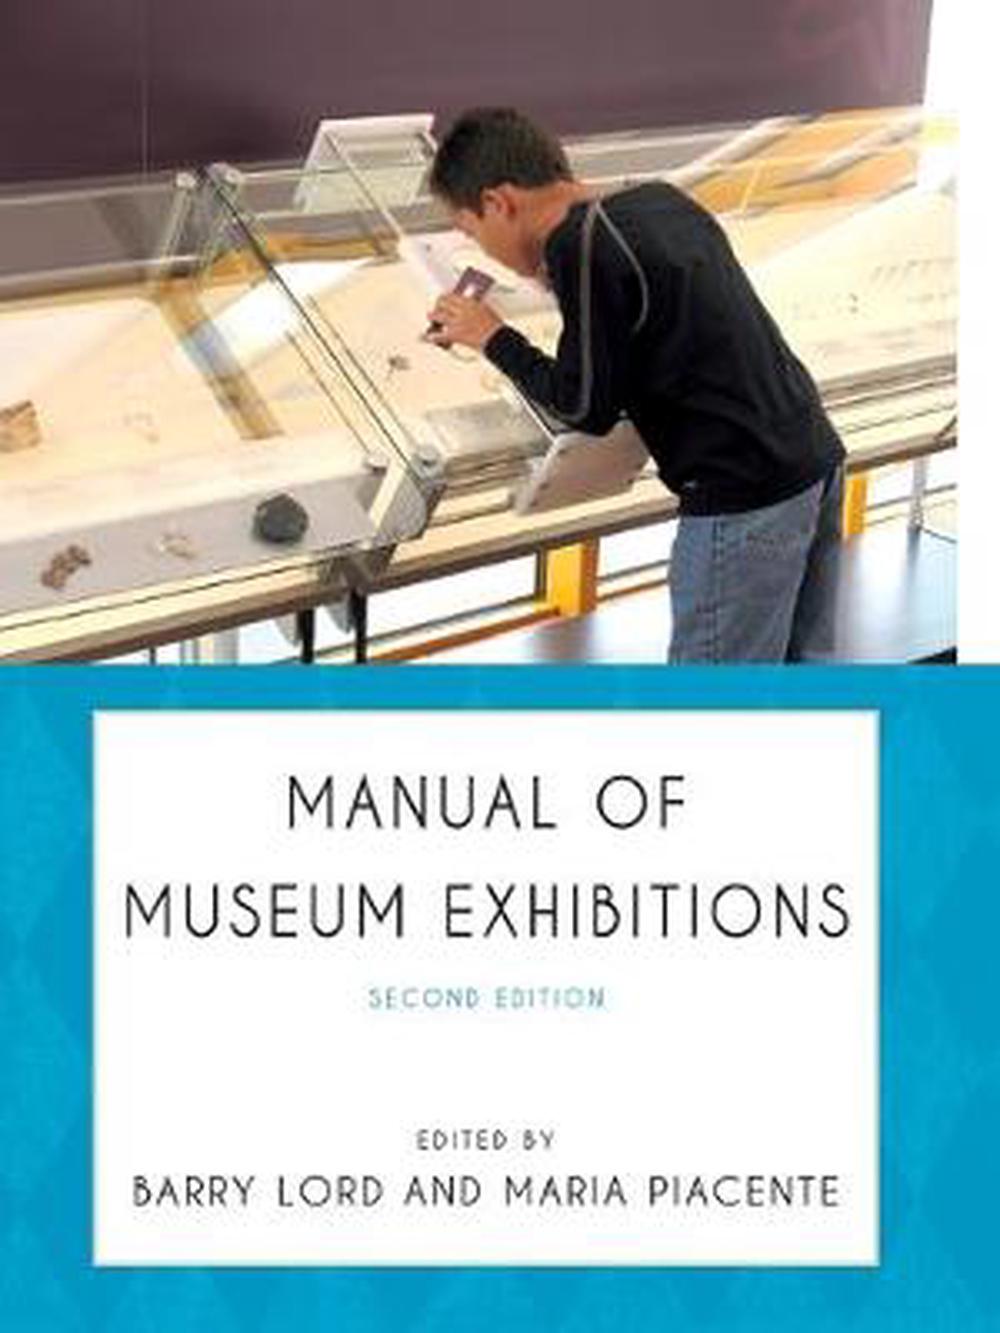 Manual of Museum Exhibitions by Barry Lord (English) Paperback Book